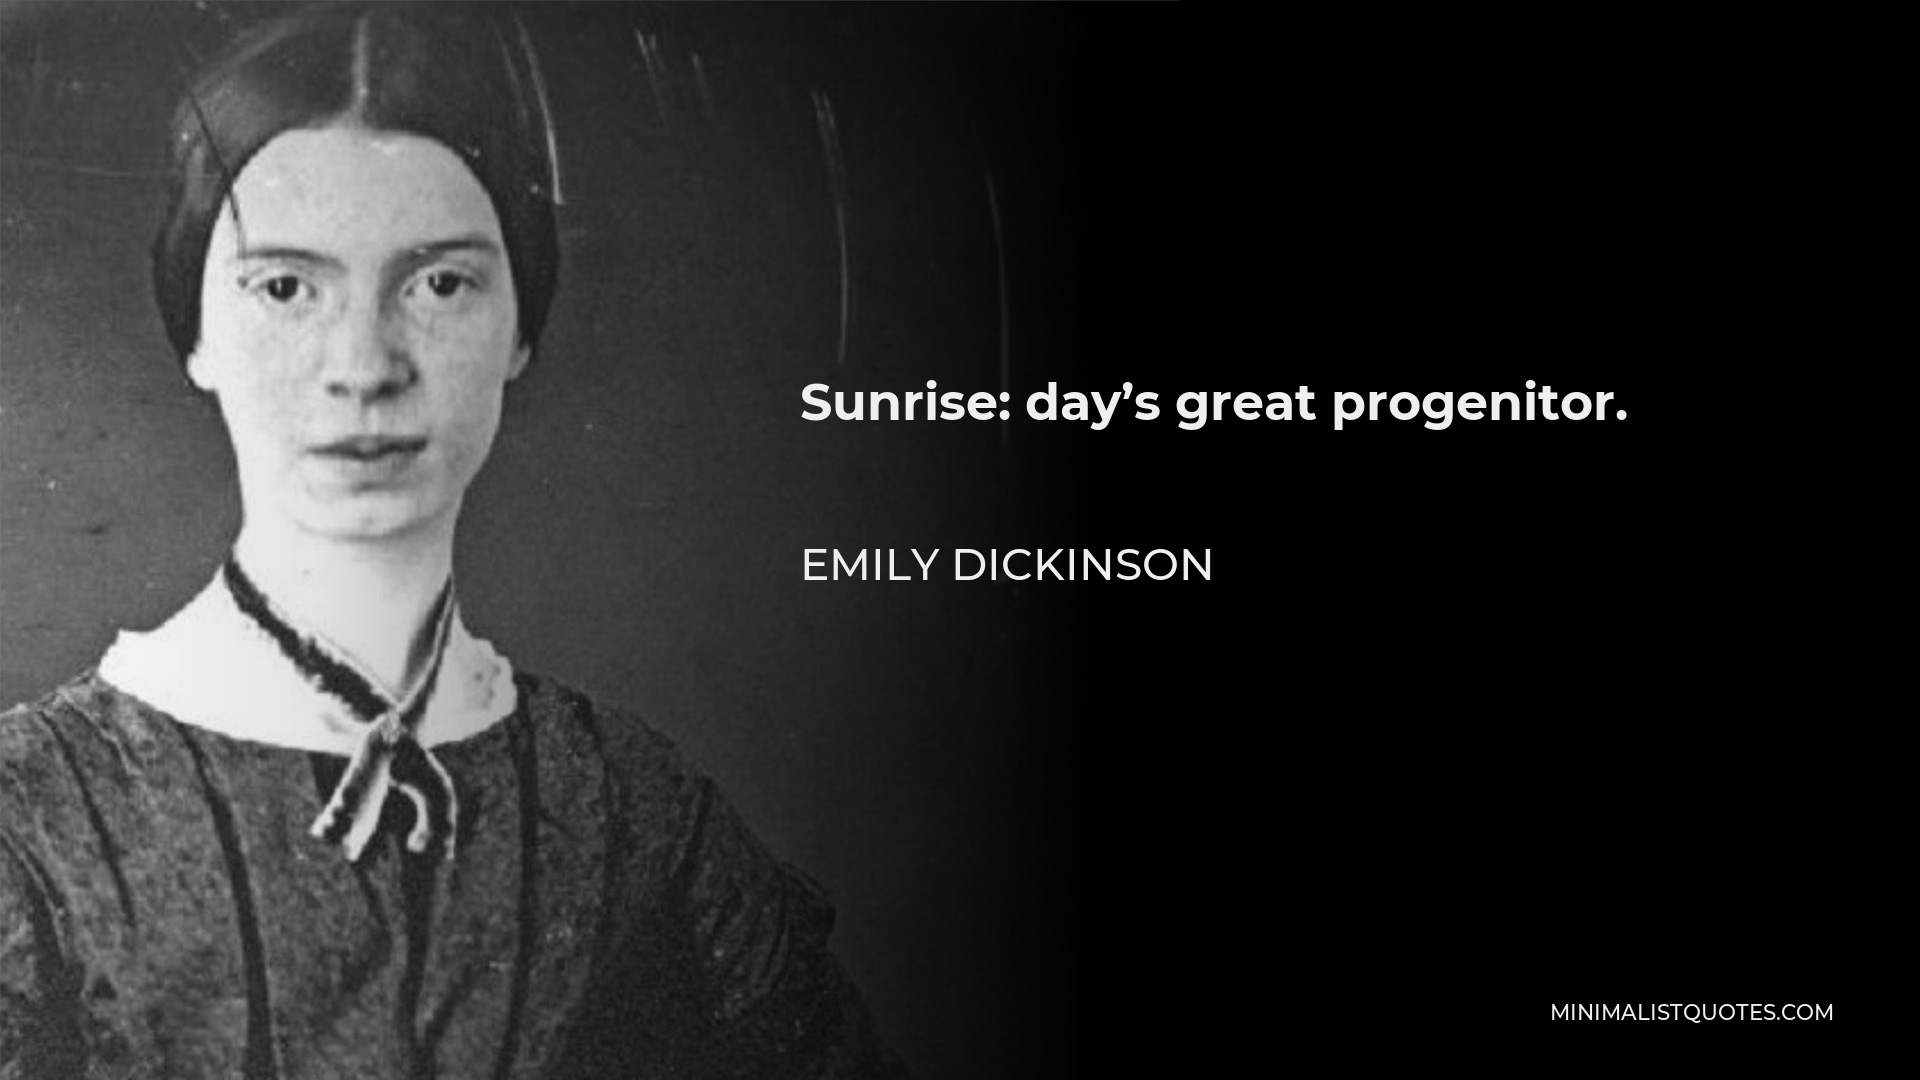 Emily Dickinson Quote - Sunrise: day’s great progenitor.